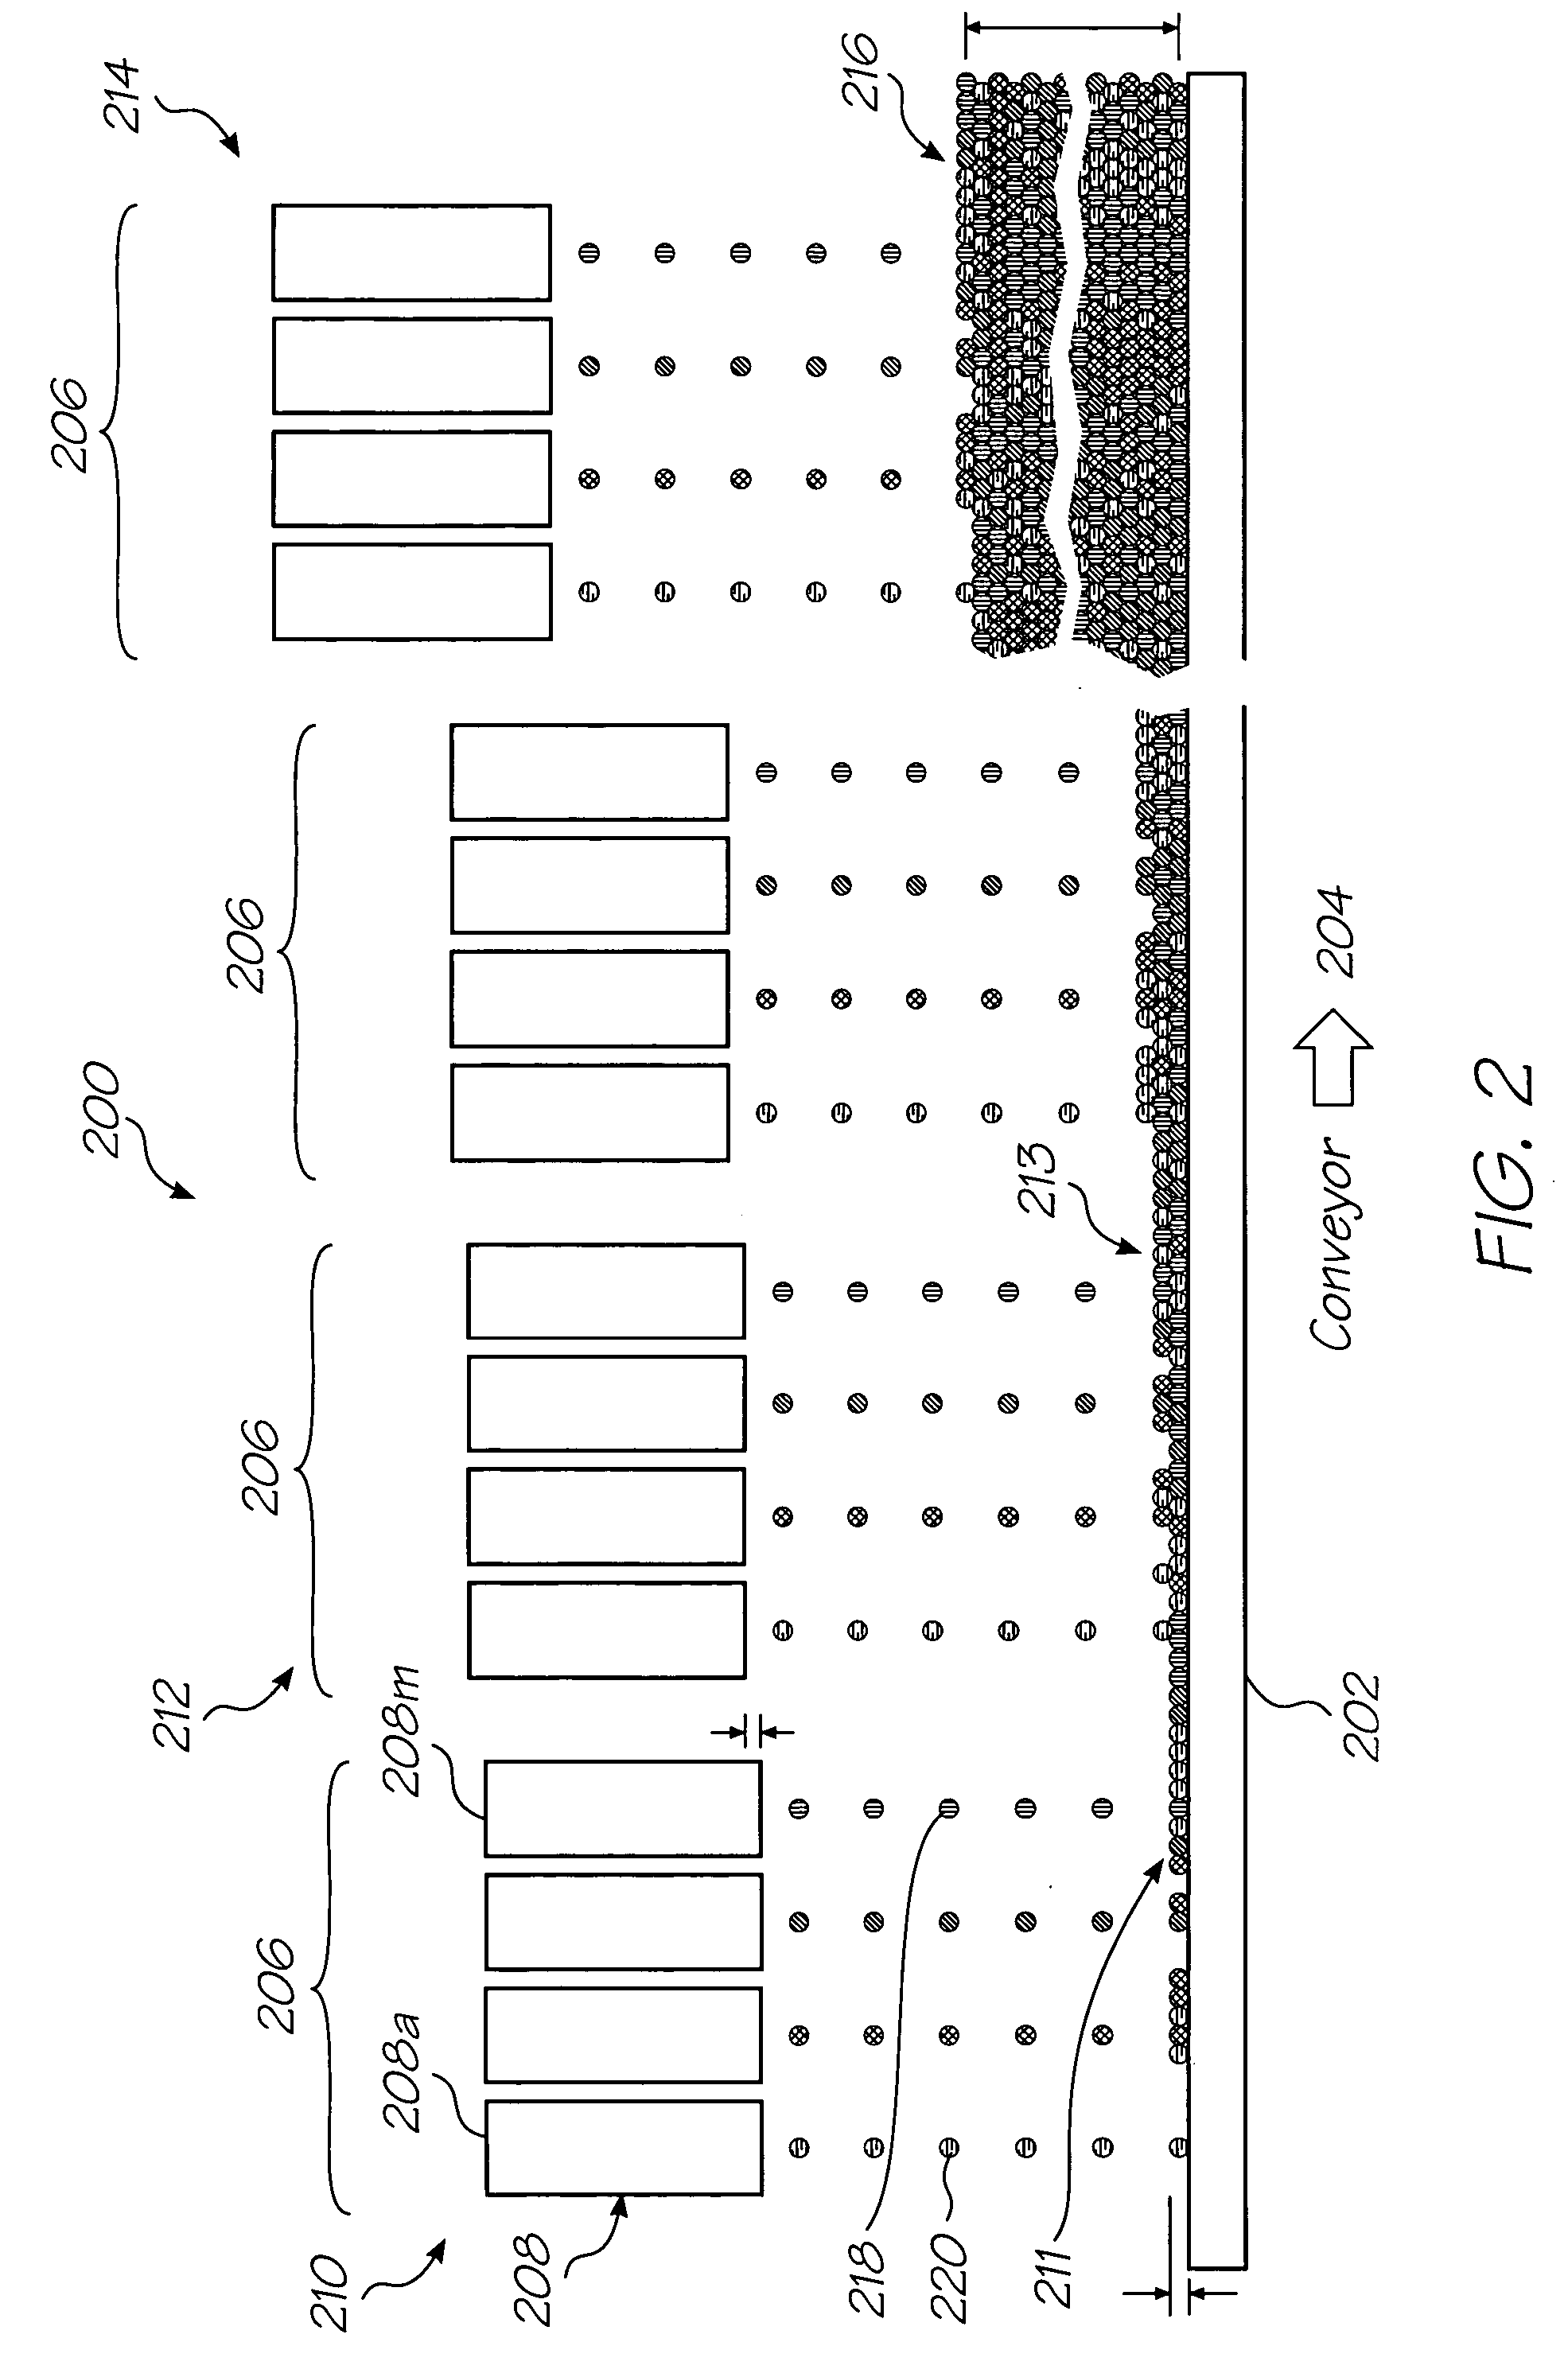 3-D object creation system using multiple materials in multiple layers